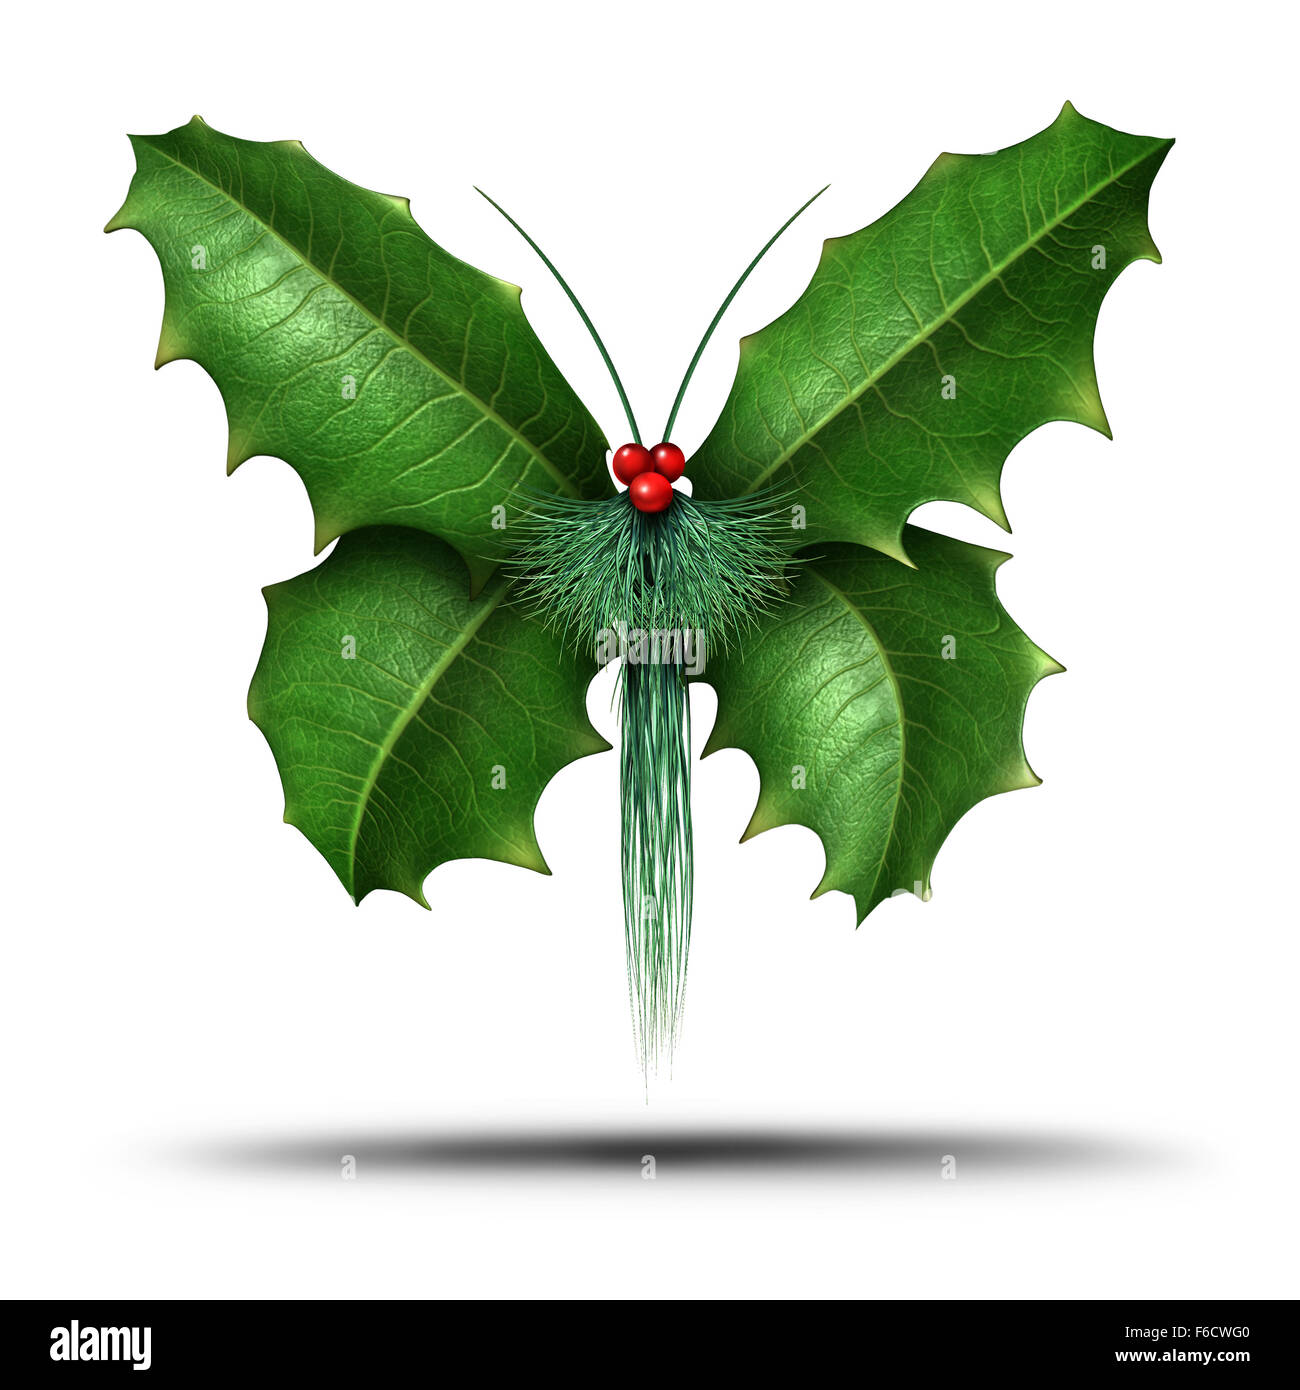 Magical holiday or Christmas celebration decoration element as a winter flying butterfly made of holly leaves evergreen pine needles and red berries as a festive freedom symbol of seasonal hope and joy on a white background. Stock Photo